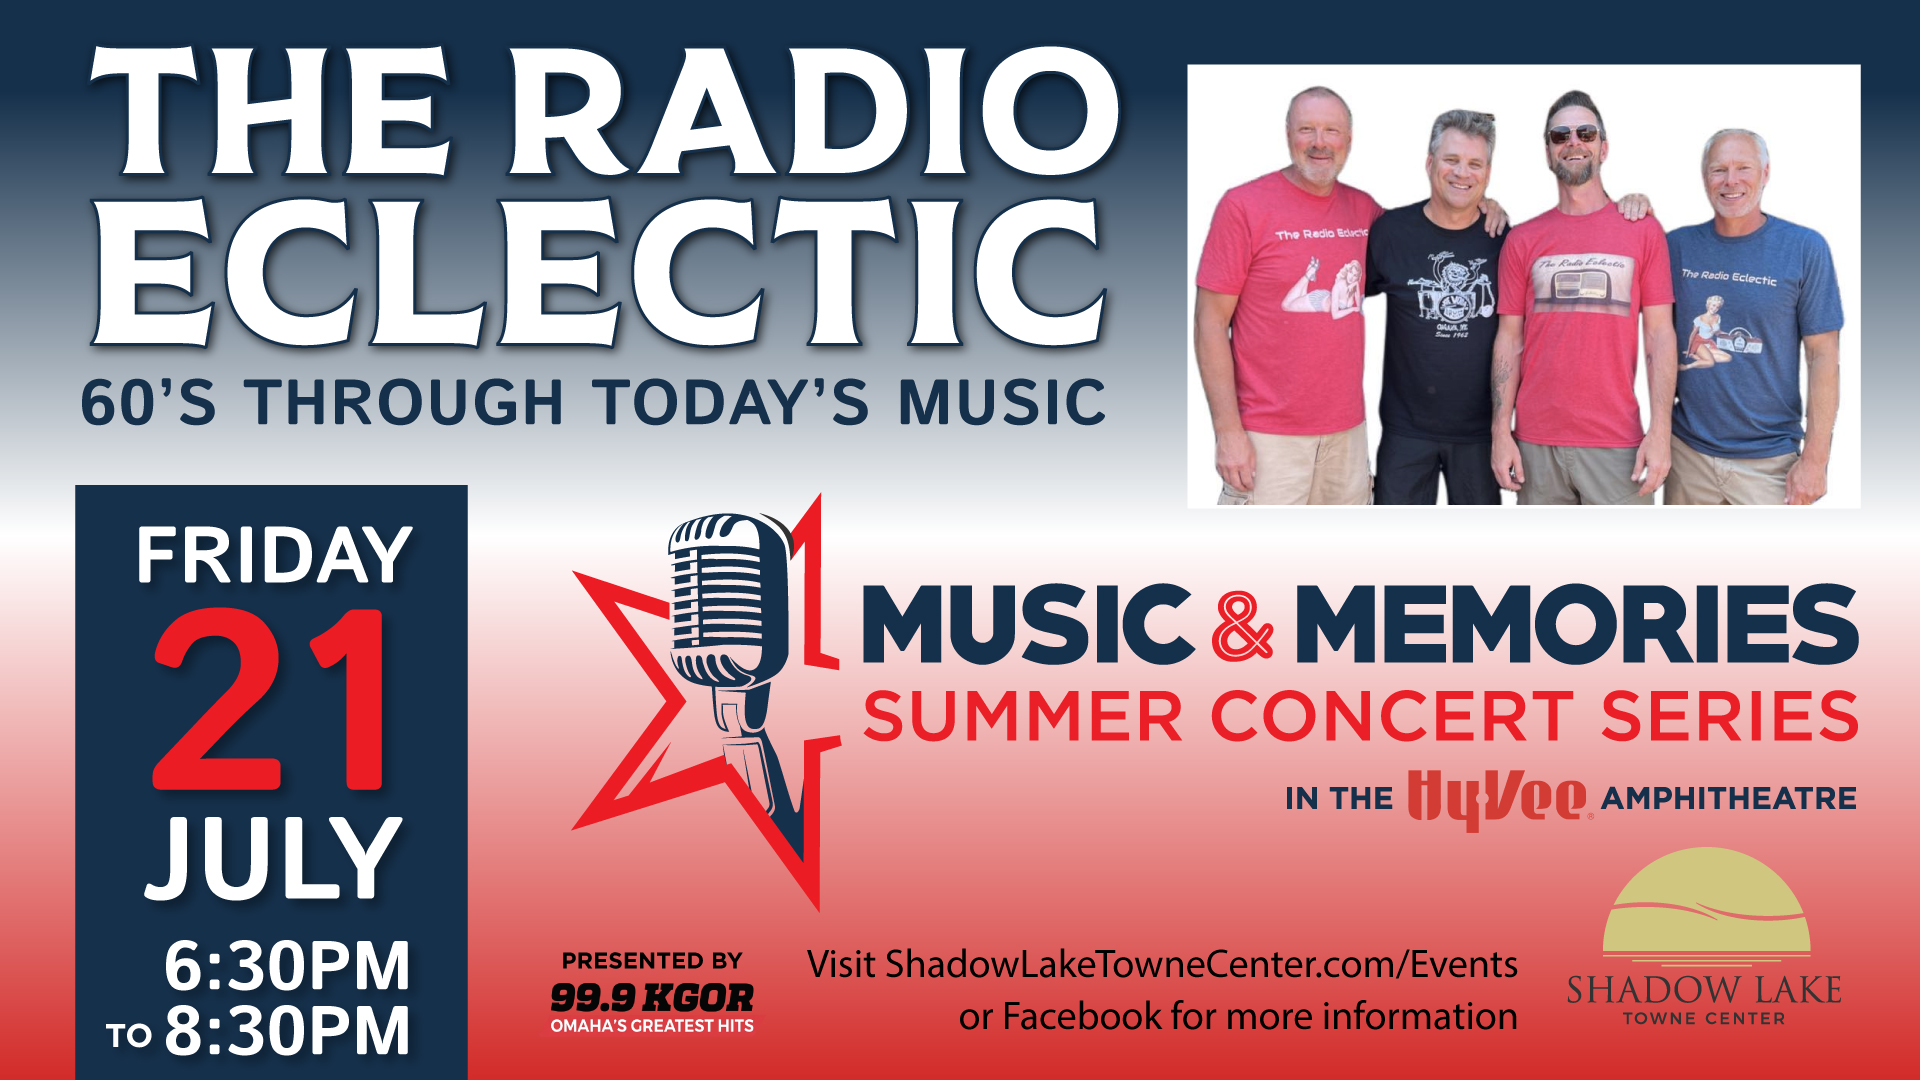 Shadow Lake Towne Center Music and Memories Concert Radio Eclectic